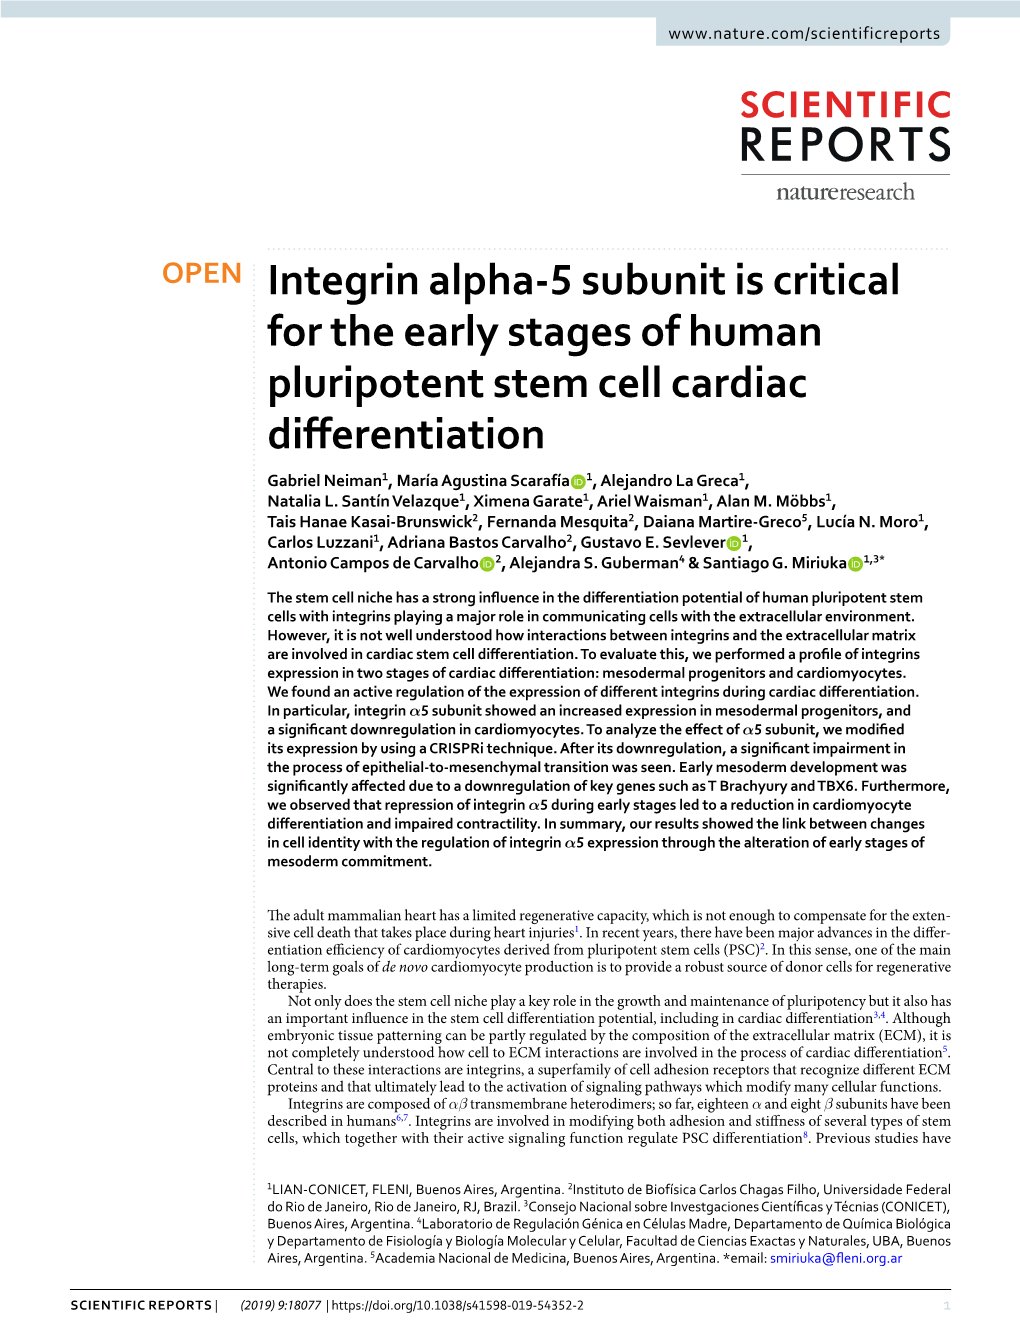 Integrin Alpha-5 Subunit Is Critical for the Early Stages of Human